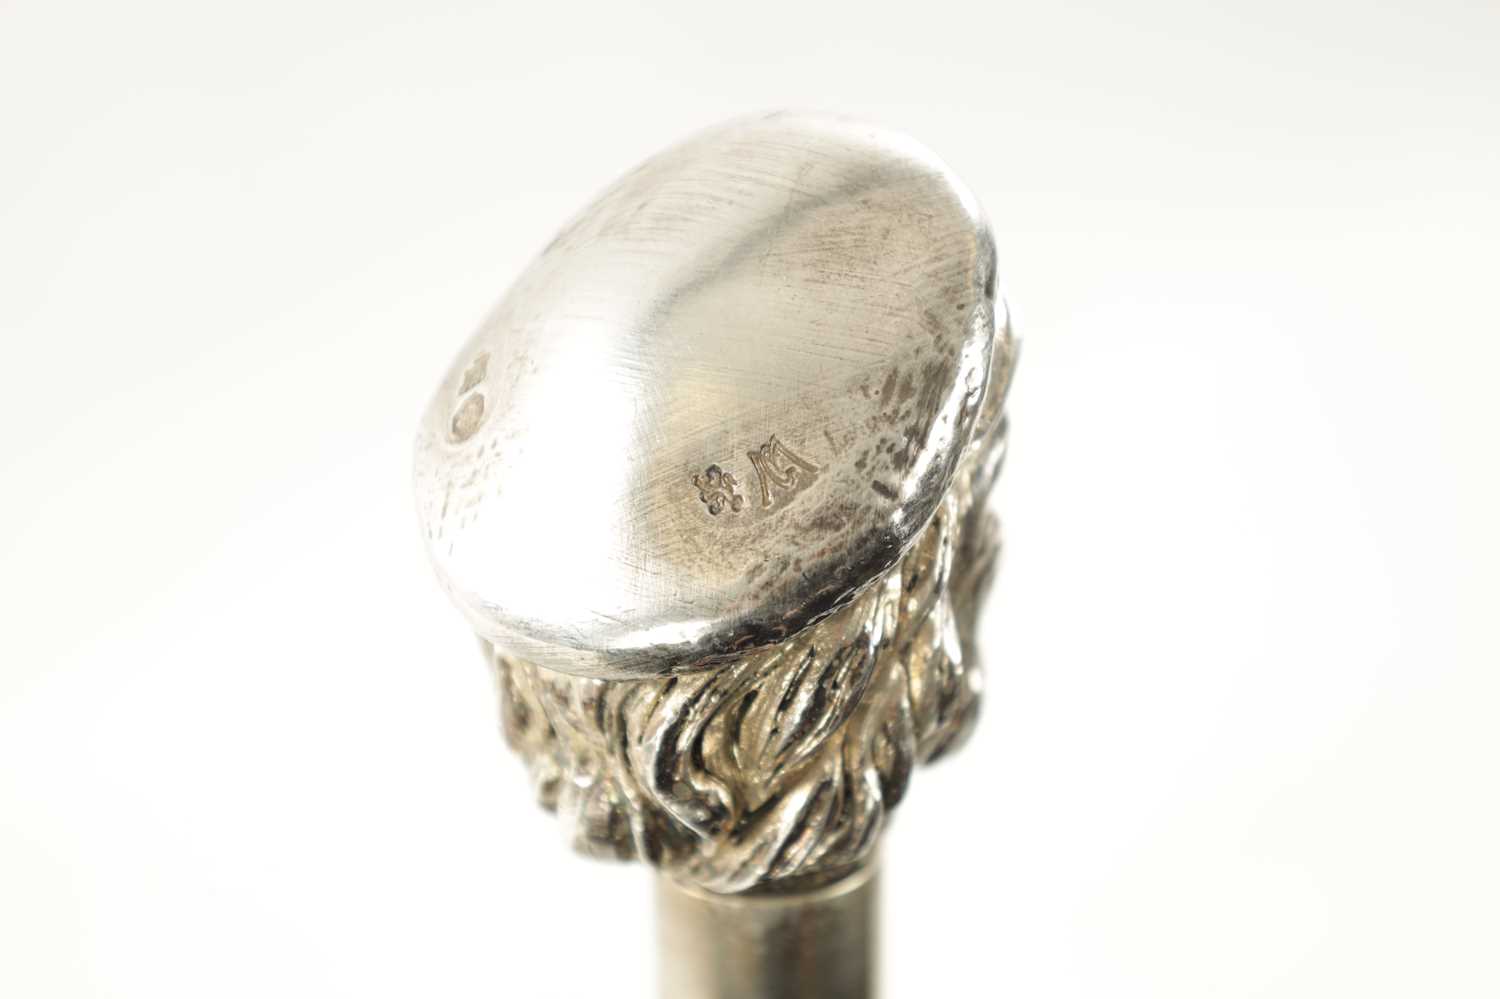 A 20TH CENTURY ITALIAN SILVER PLATE FIGURAL TOPPED WALKING STICK - Image 5 of 7